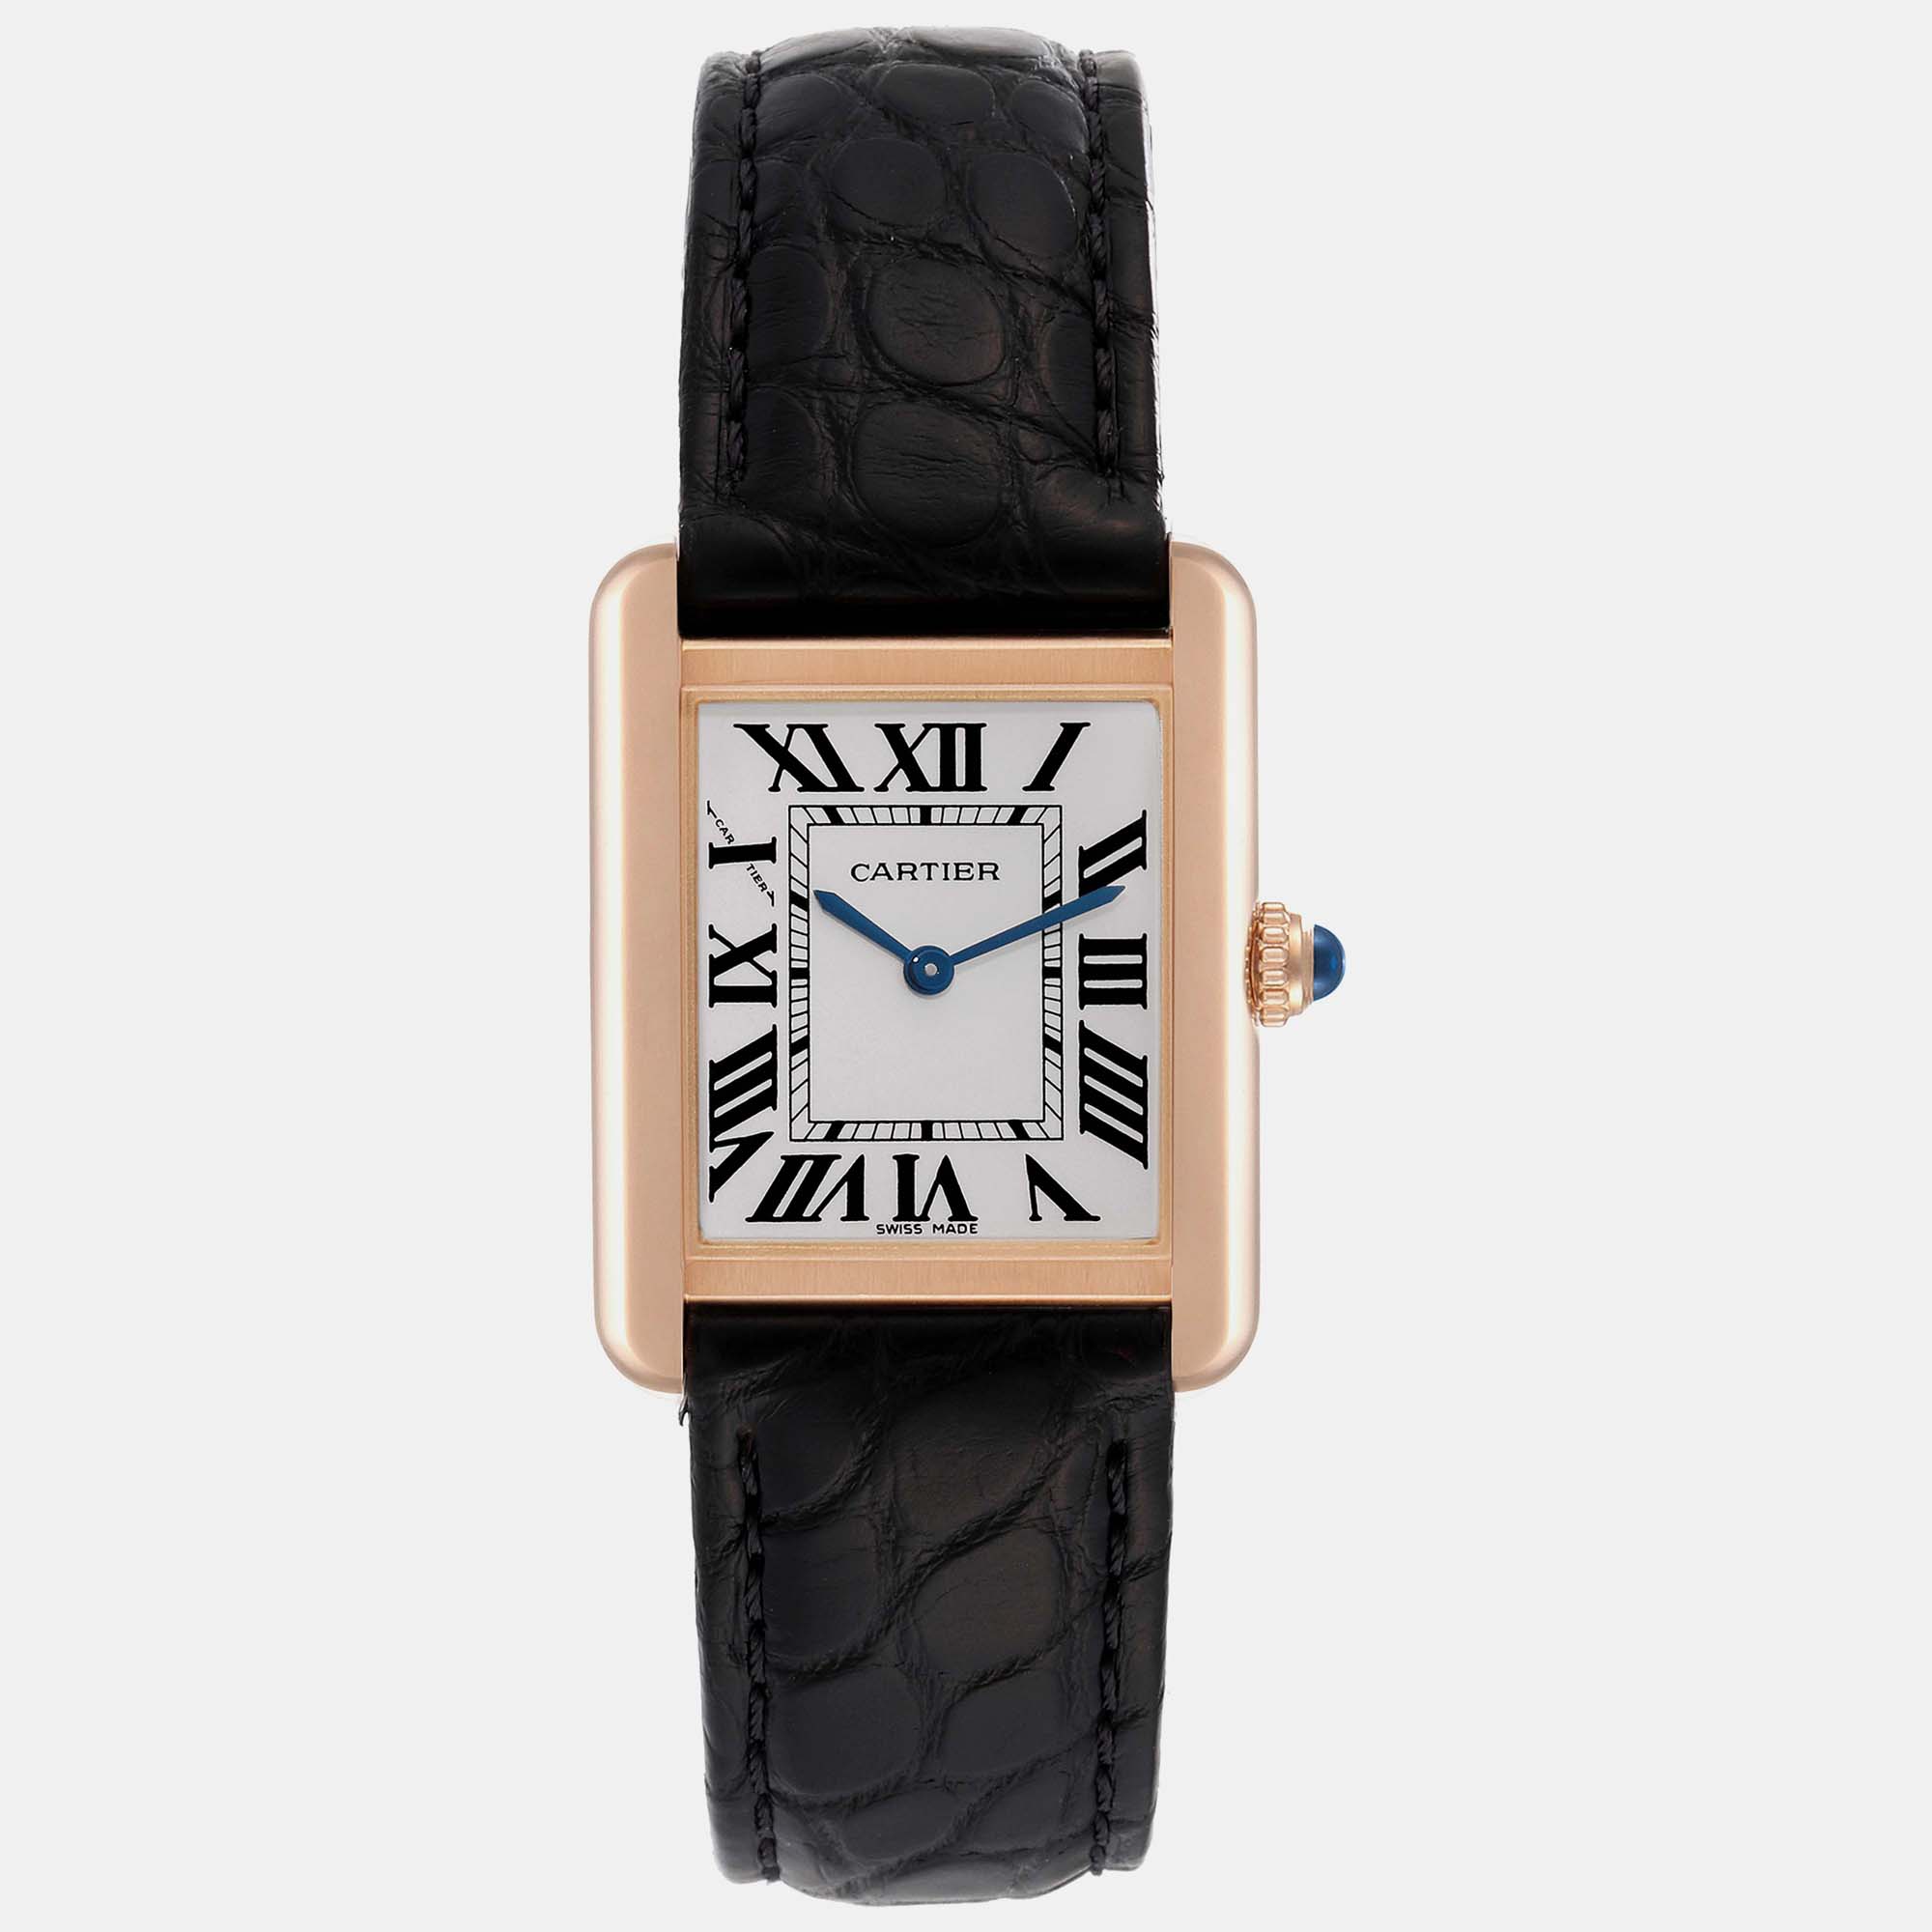 Cartier tank solo silver dial rose gold steel ladies watch 24.4 mm